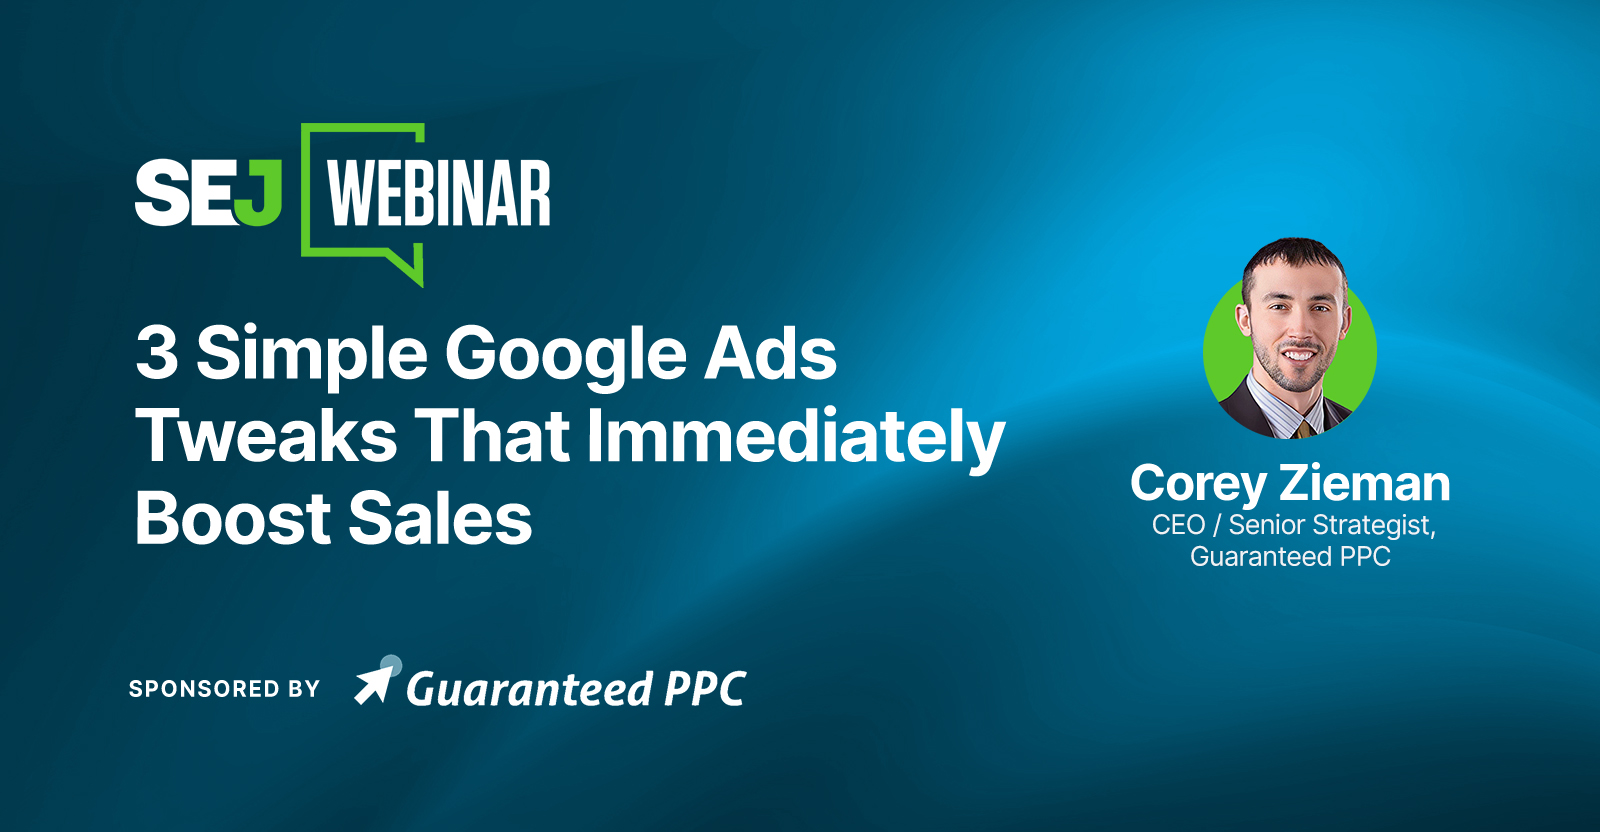 How To Increase Your Google Ads Profit With 3 Simple Steps [Webinar]